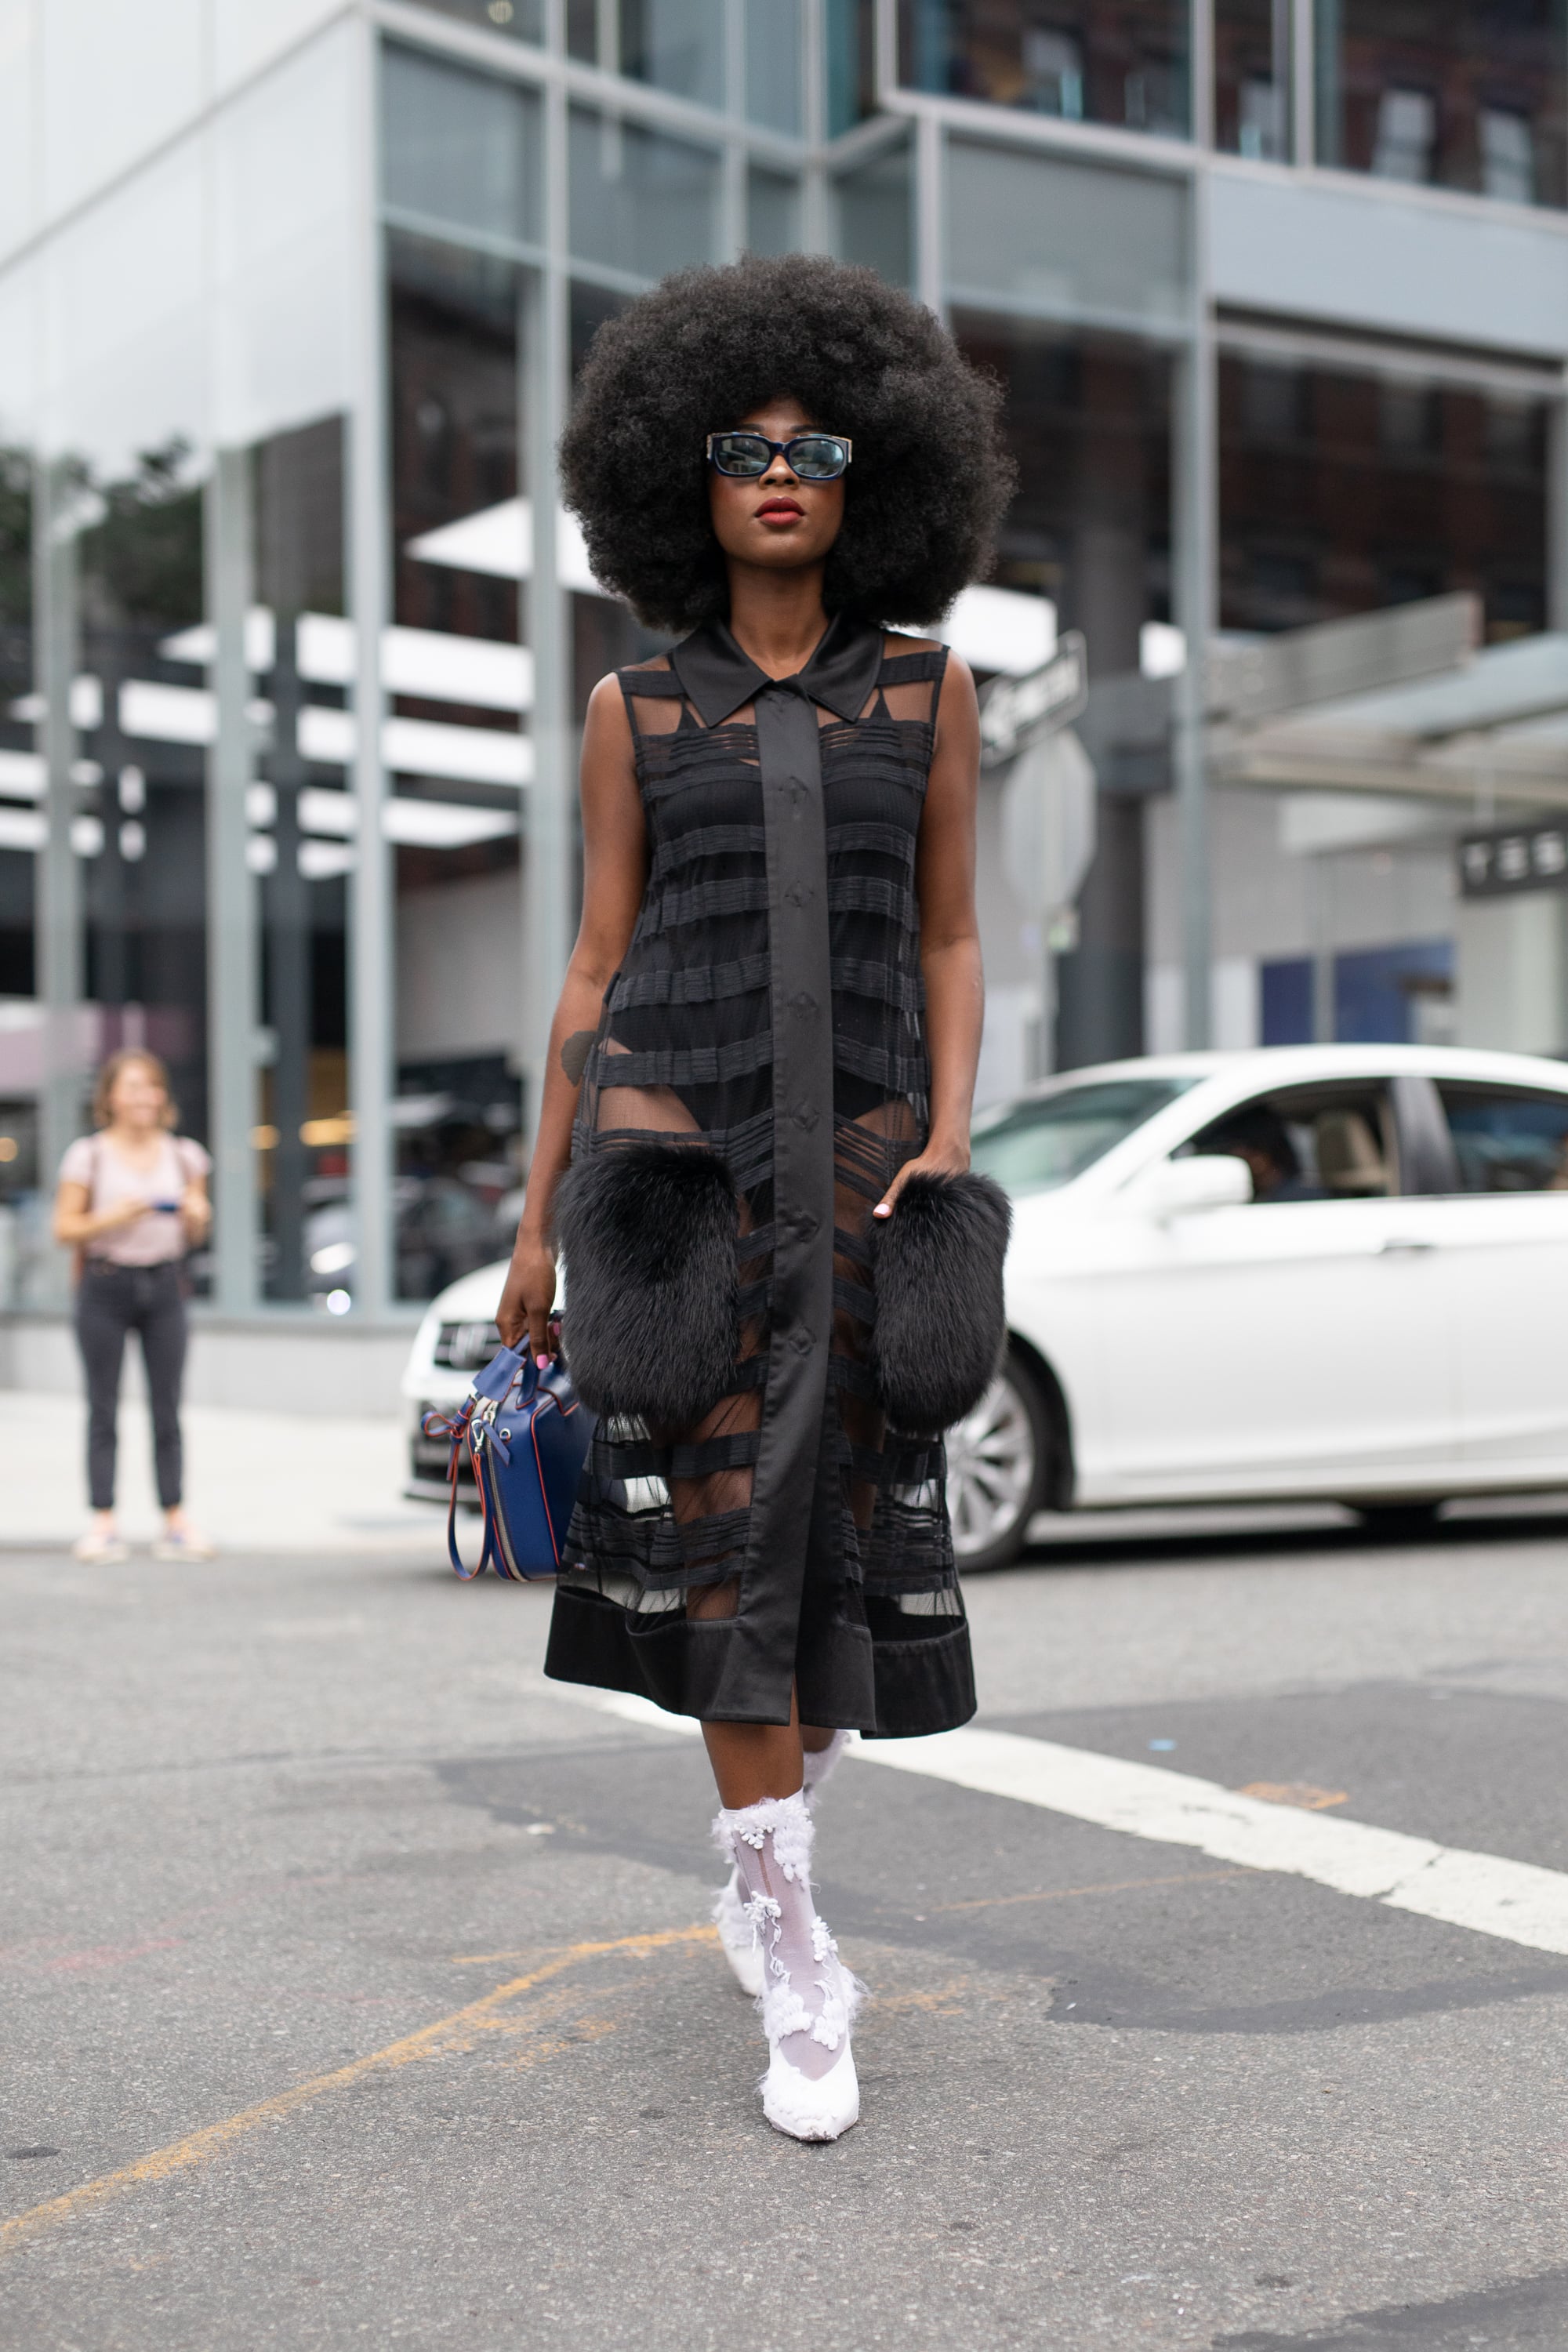 This Is by Far the Riskiest Outfit We've Seen at Fashion Week